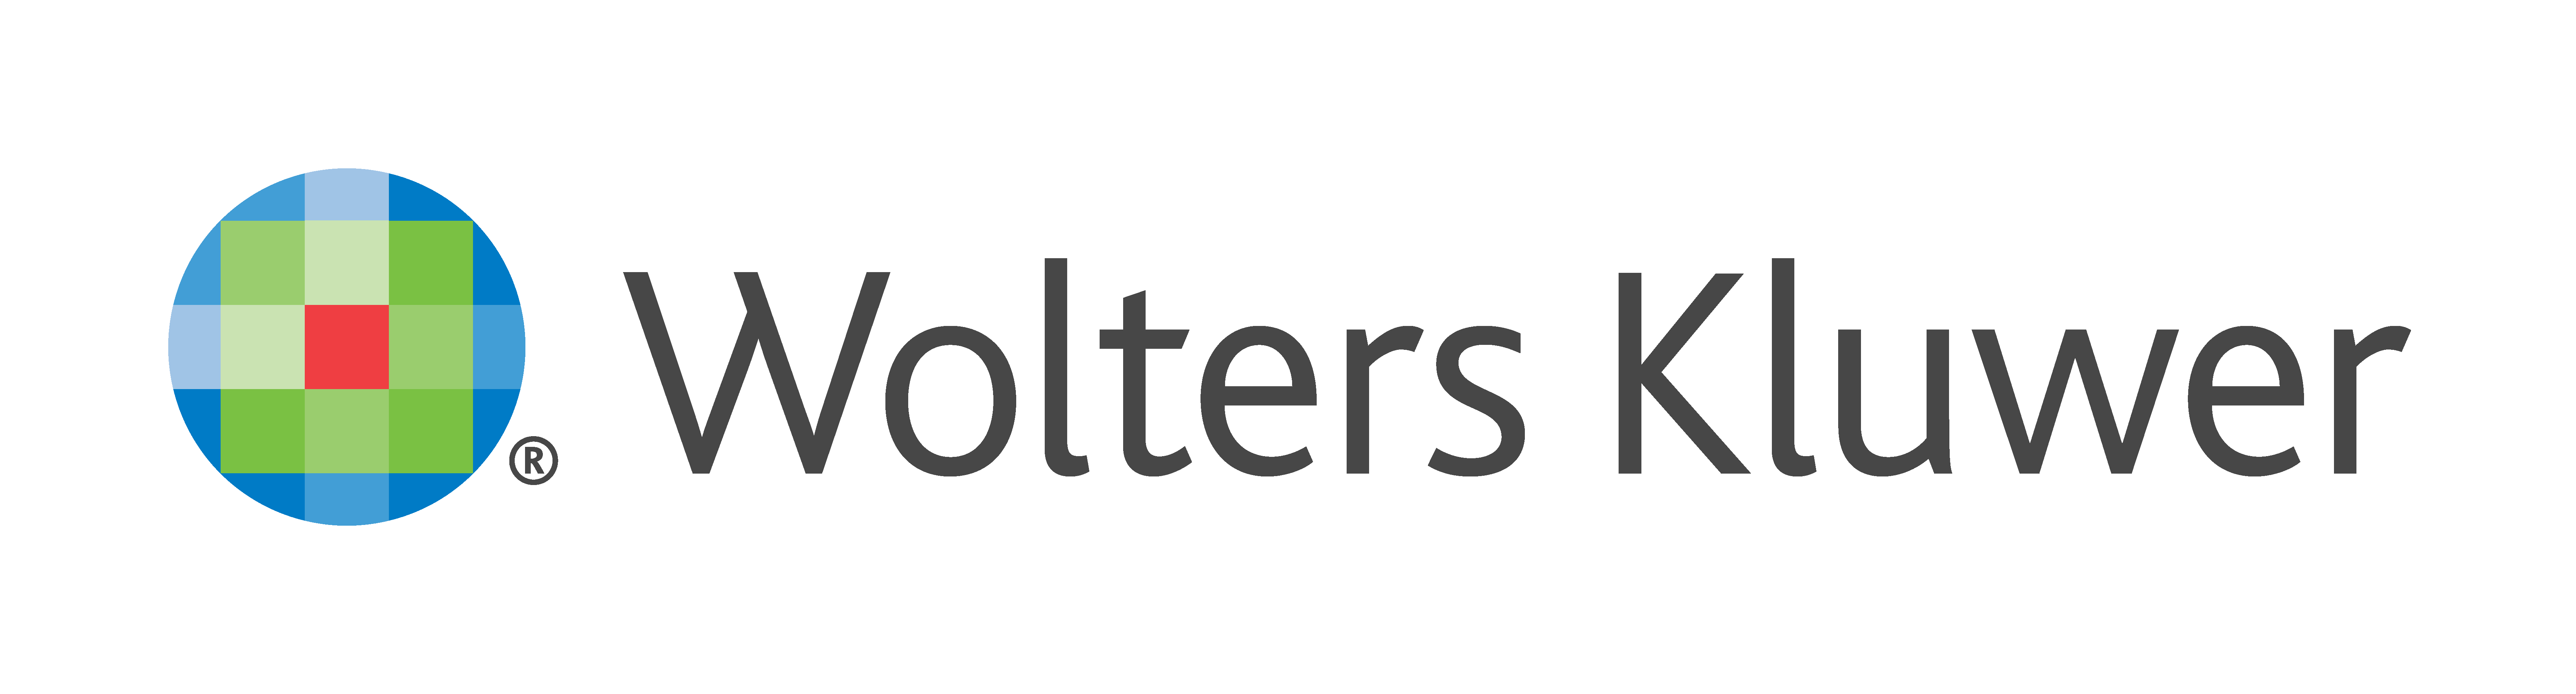 Wolters Kluwer Company Logo